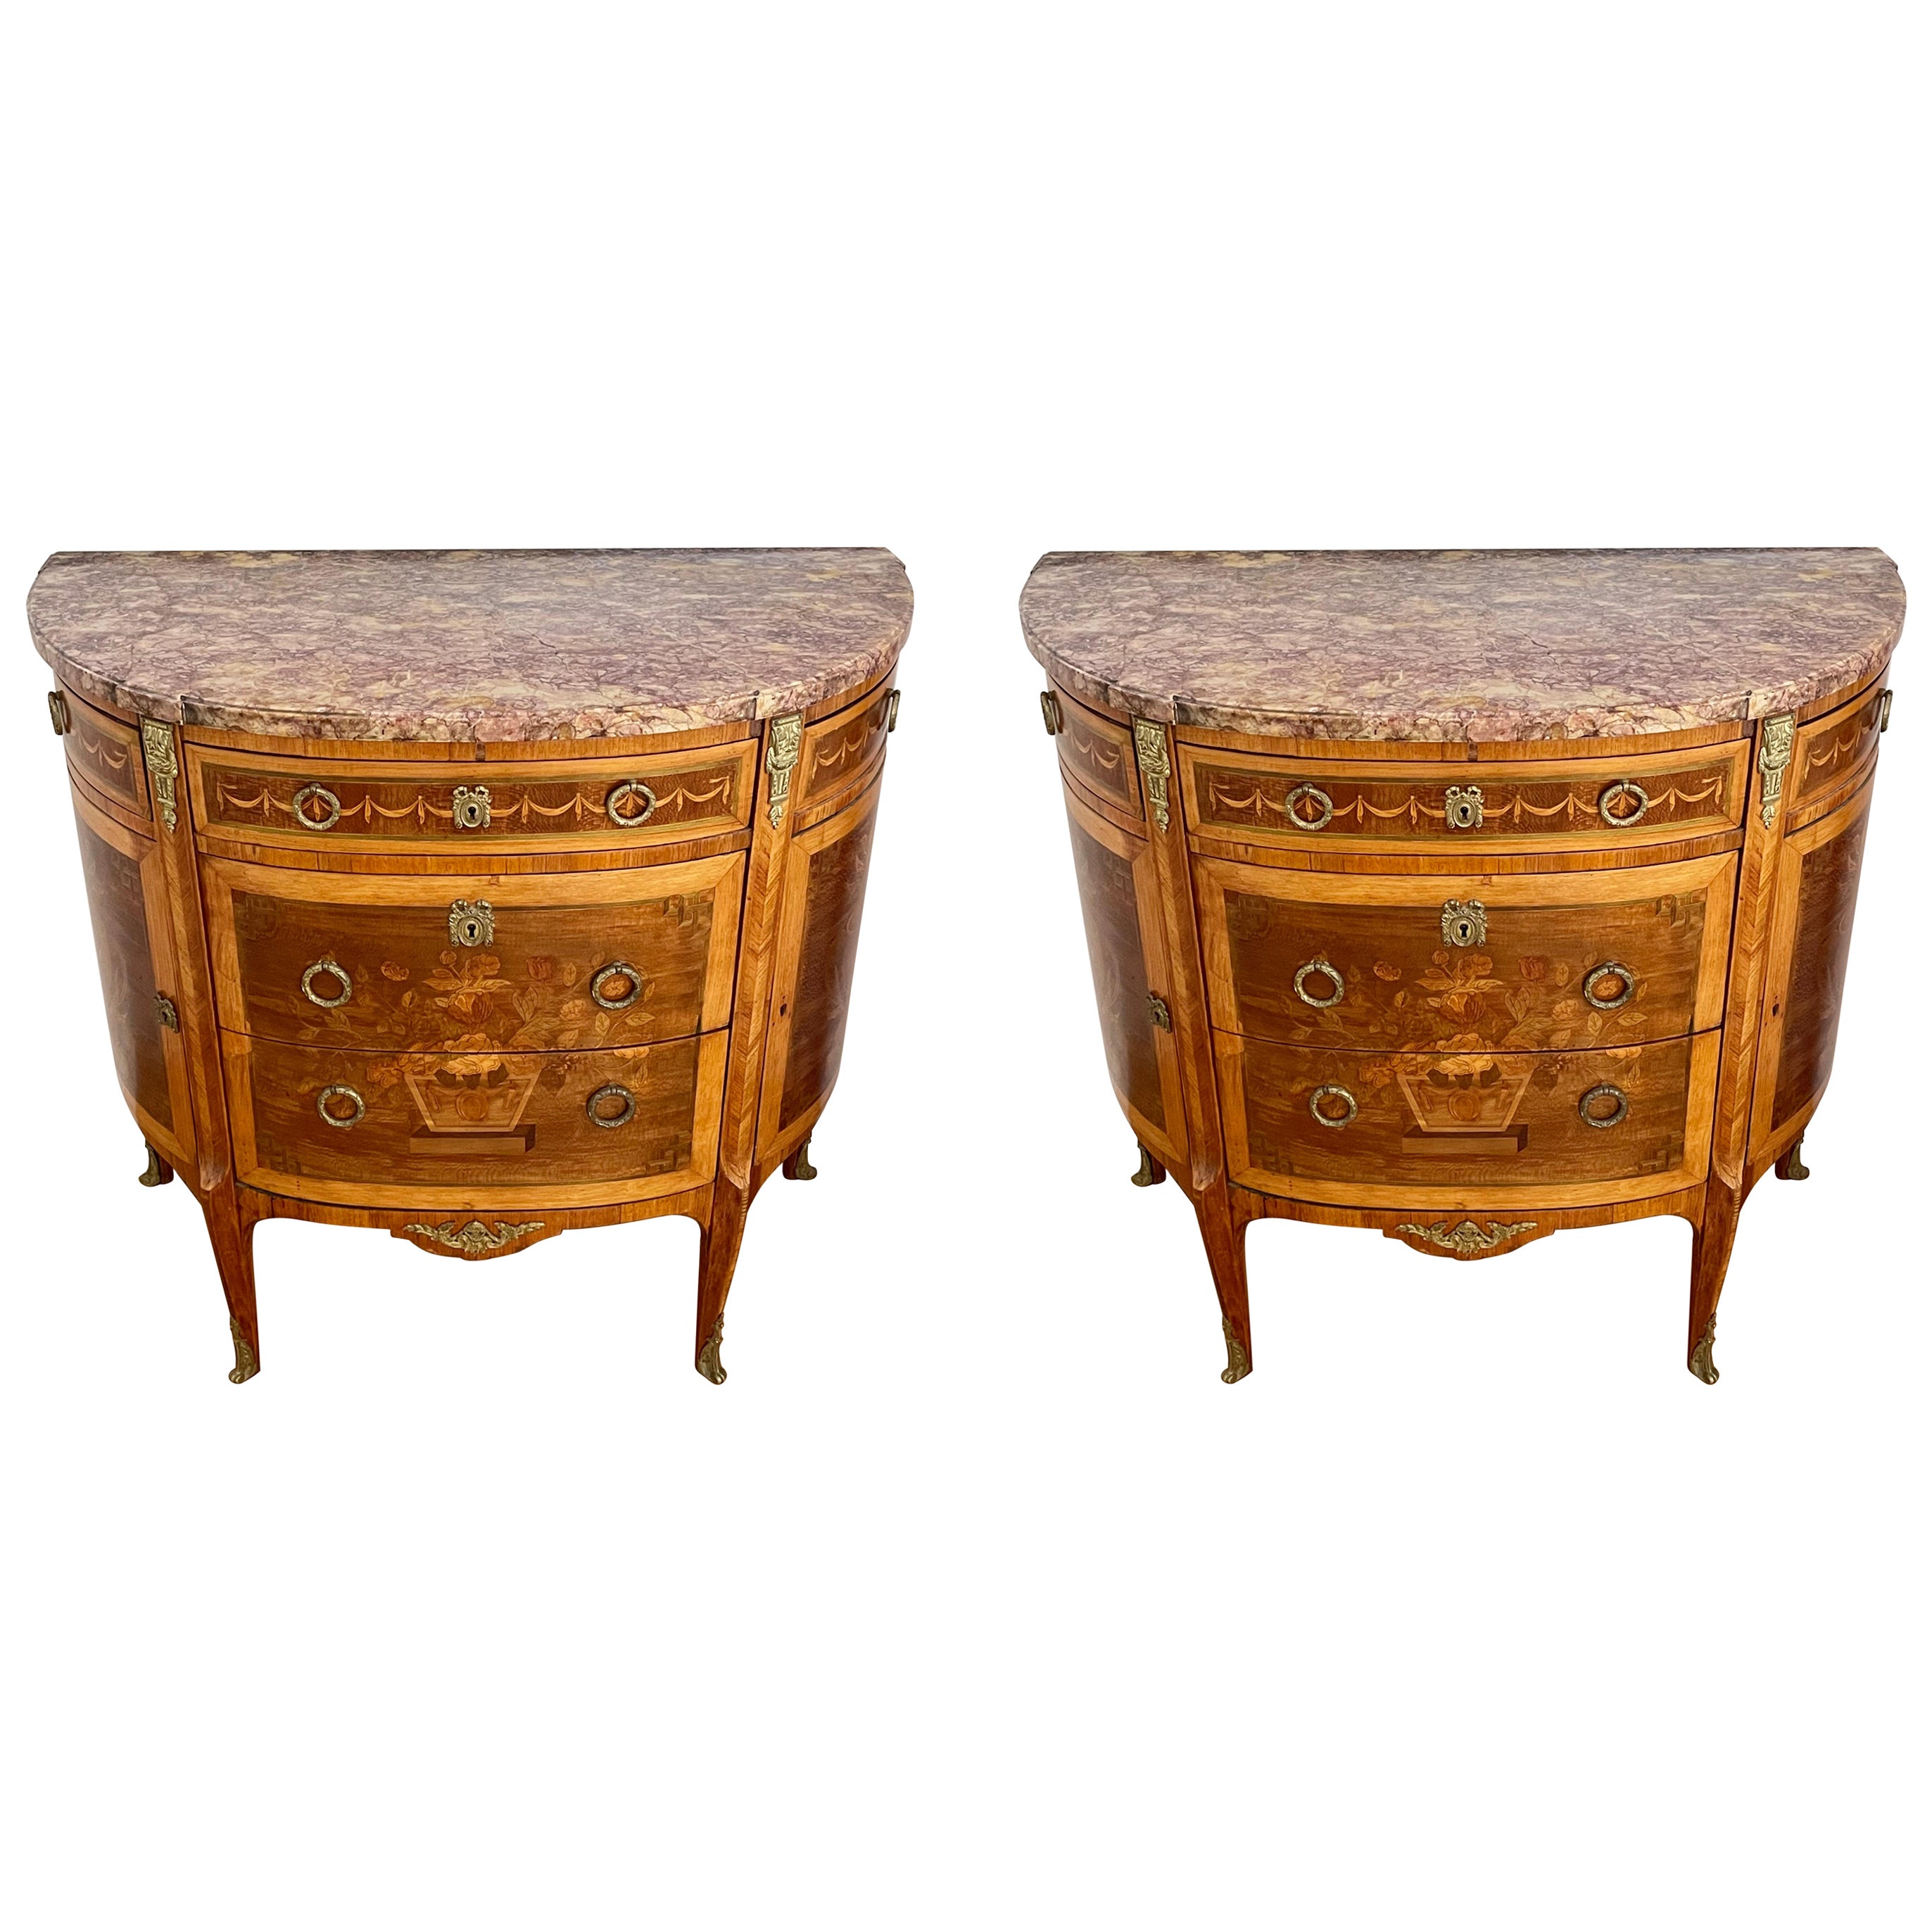 Pair of Neoclassical Kingwood Demi-Lune Commodes